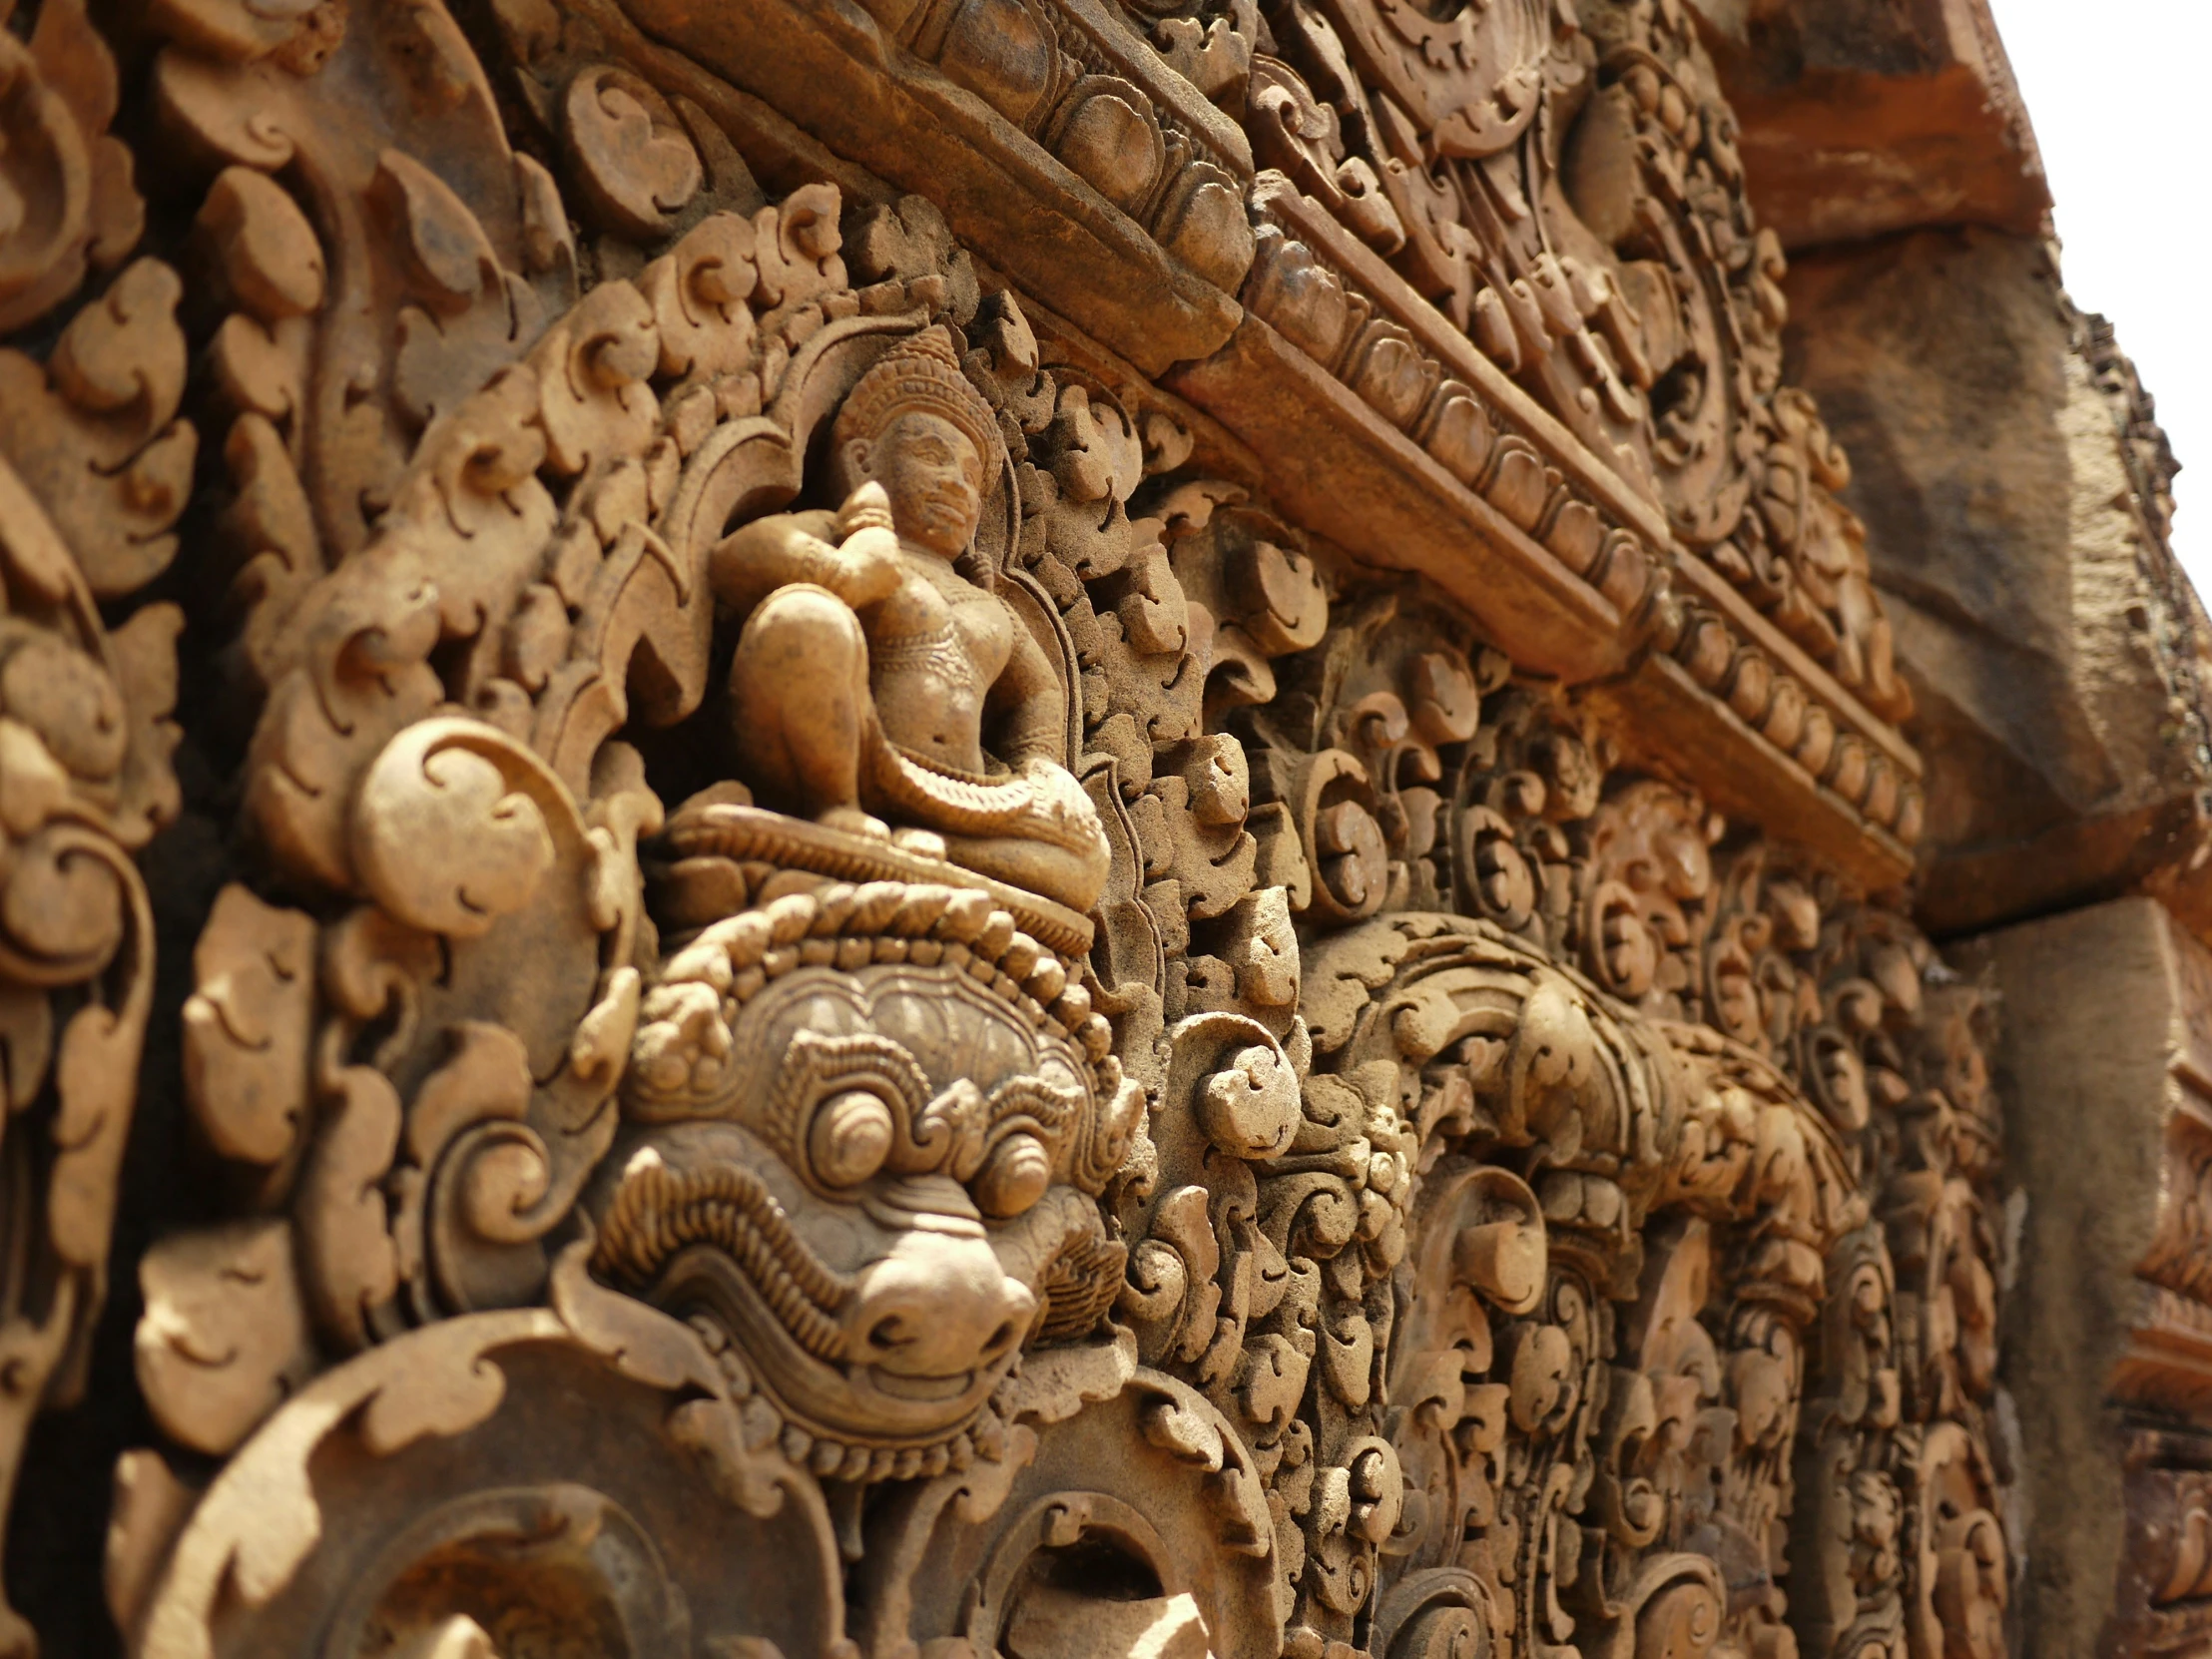 a stone carving of various deities and animals with different designs on it